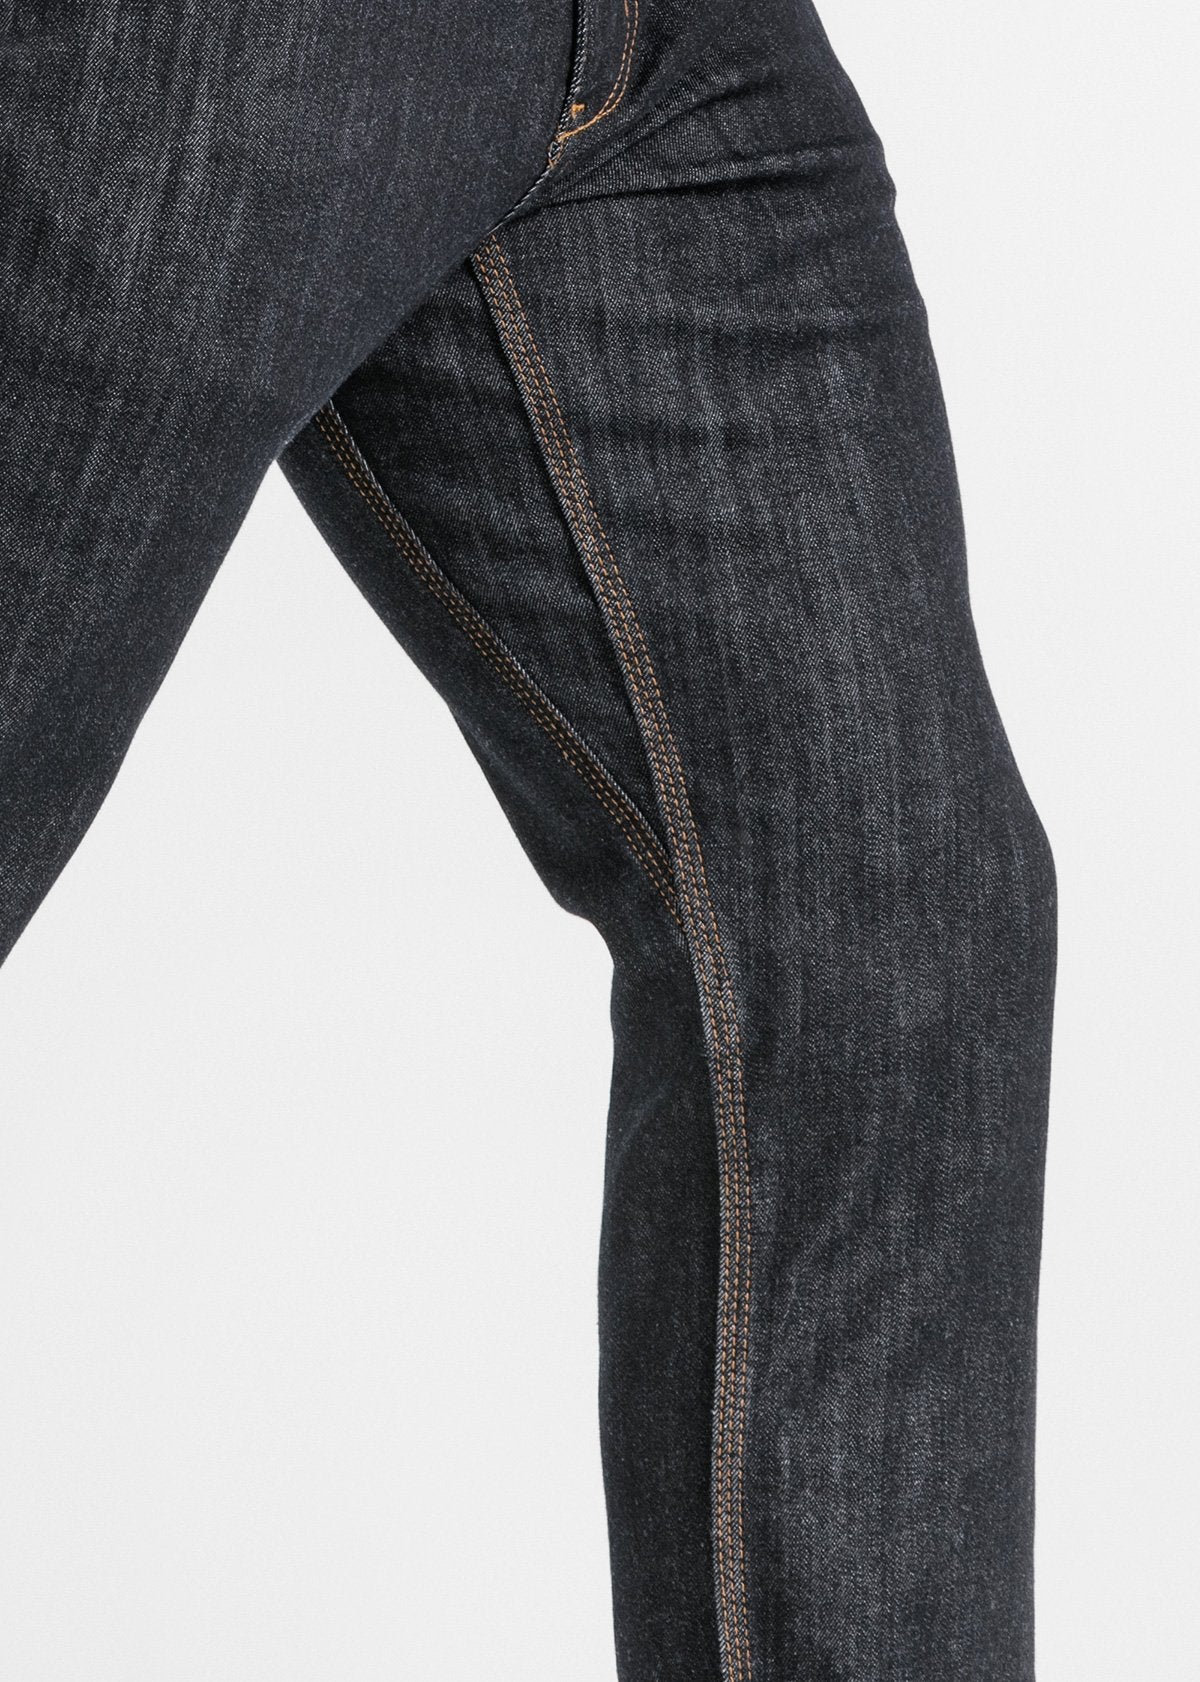 mens dark blue relaxed fit warm stretch jeans gusset detail